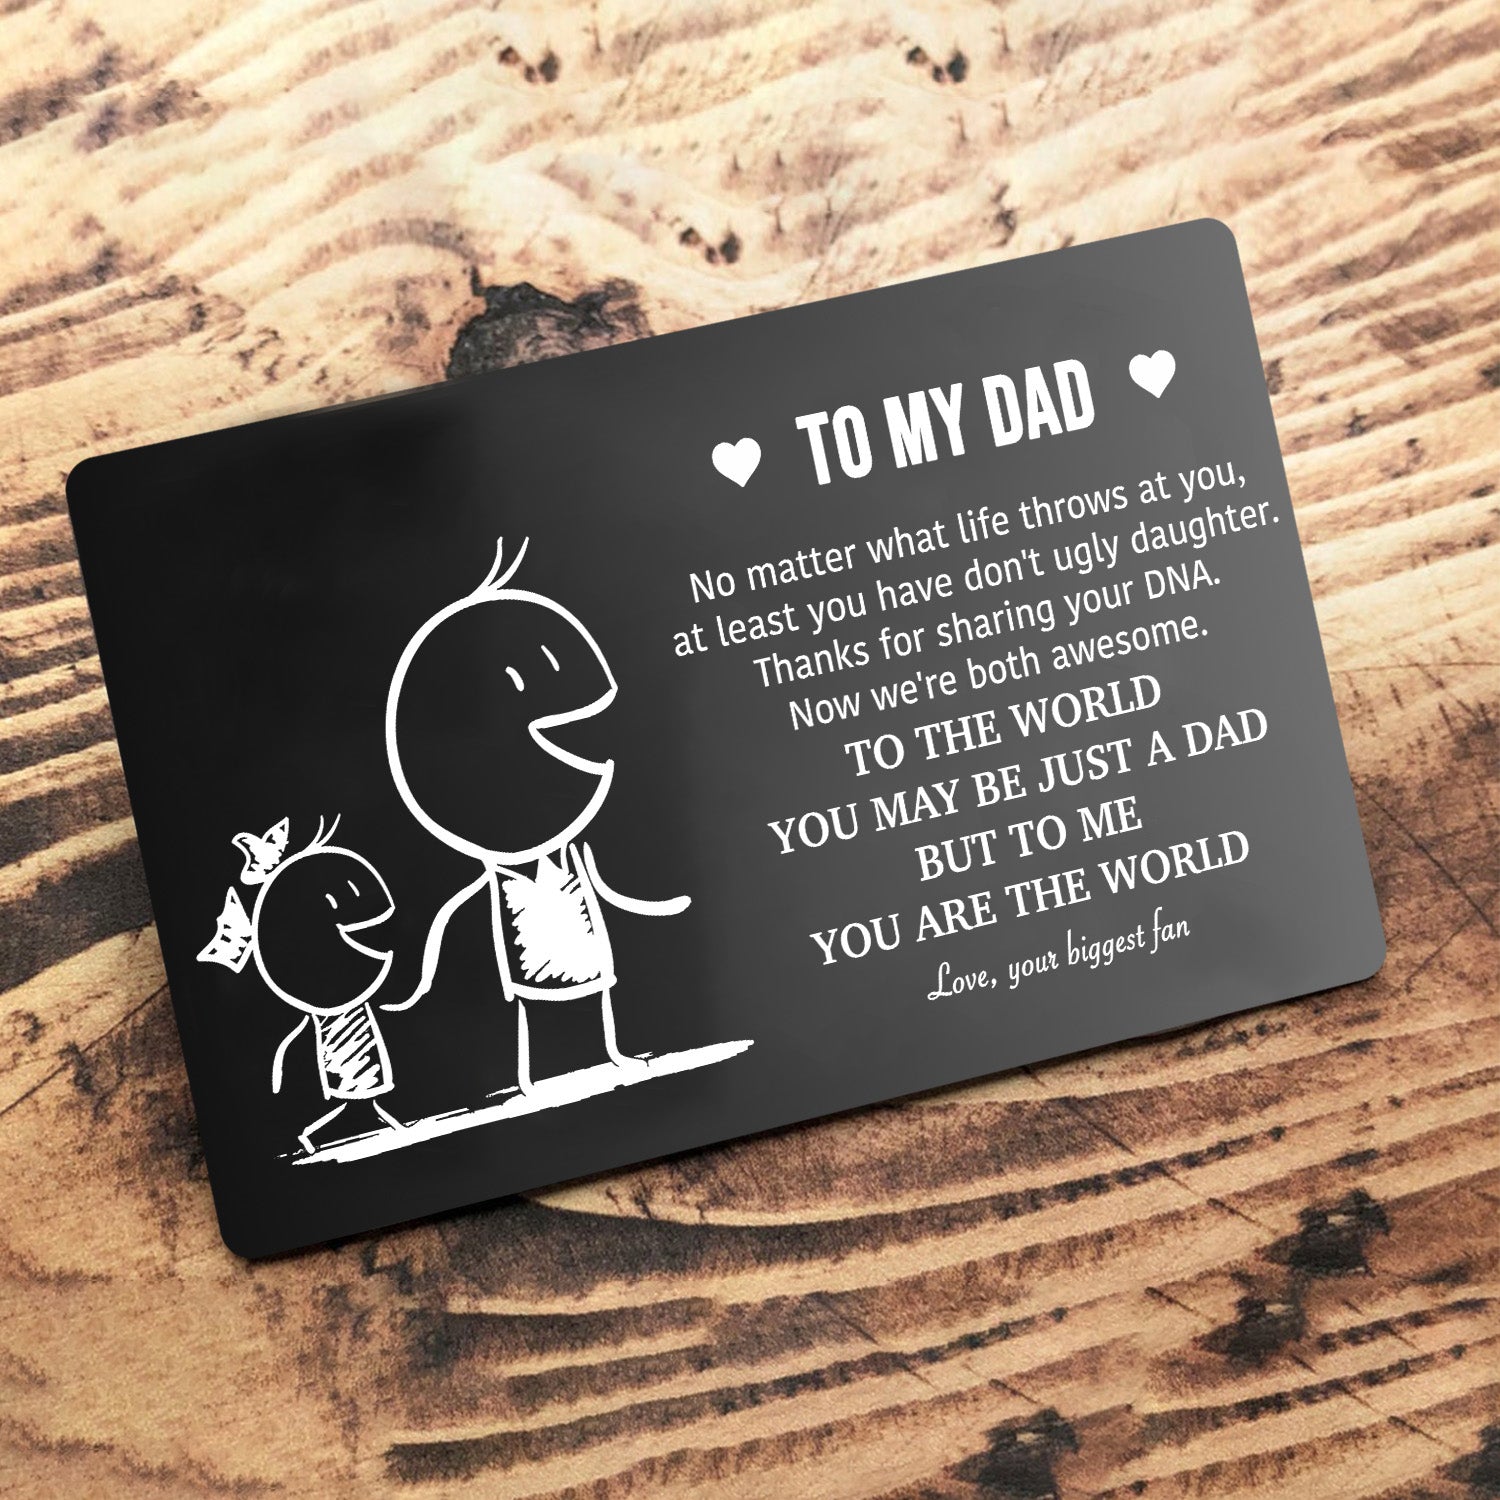 Wallet Card - Family - To Dad - Thanks For Sharing Your DNA! - Ukgca18010